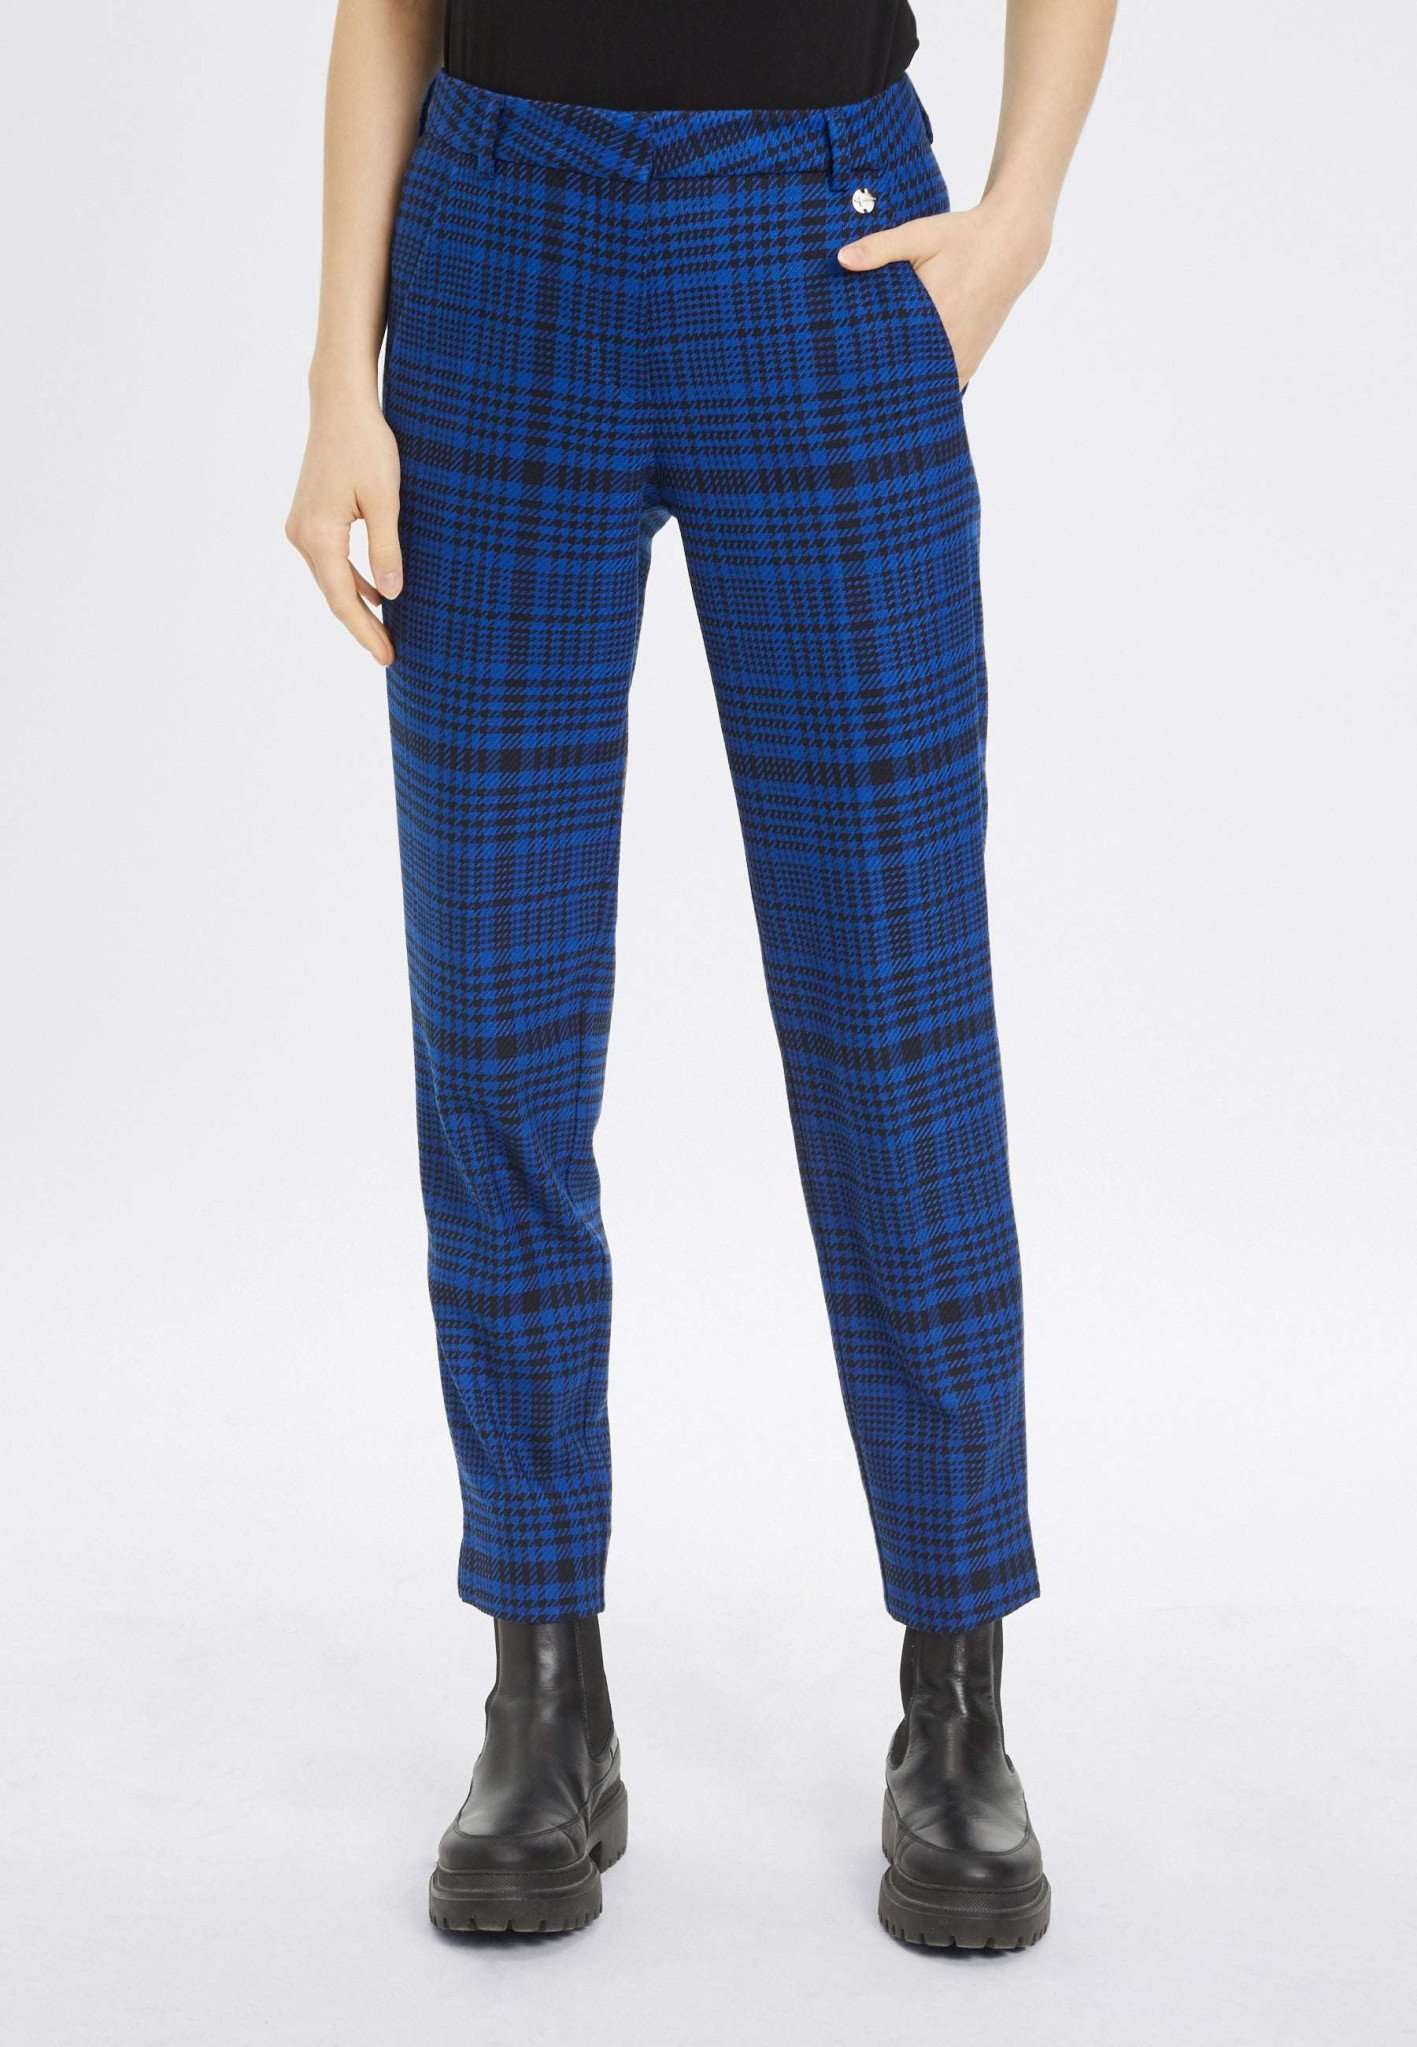 Ariana Check Cigarette Pants in Blueberry Houndstooth Check Hosen Tamaris   